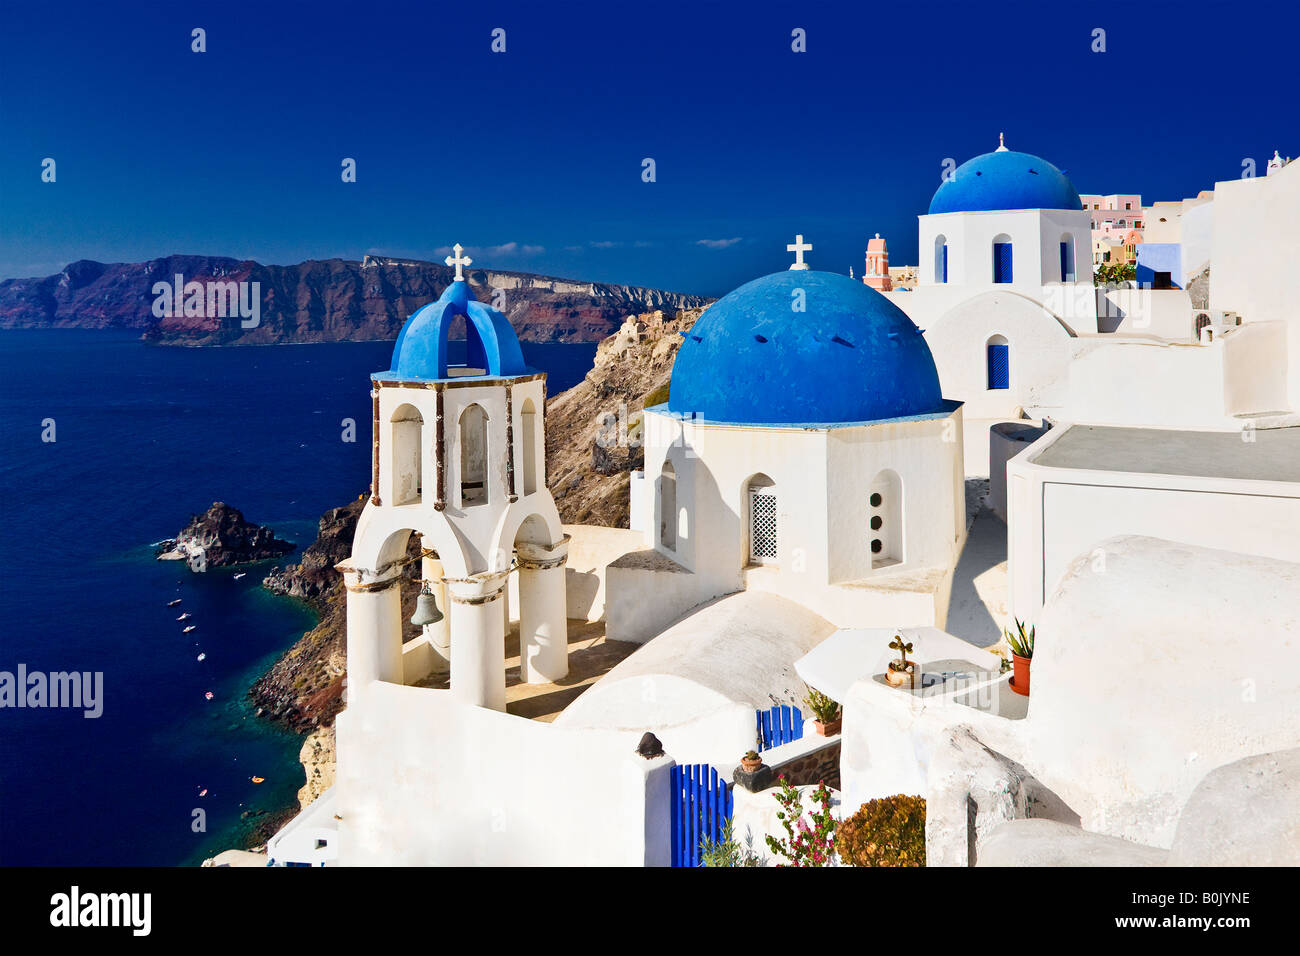 Blue dome rooftops of churches looking over the ocean Oia, Santorini, Greece Stock Photo